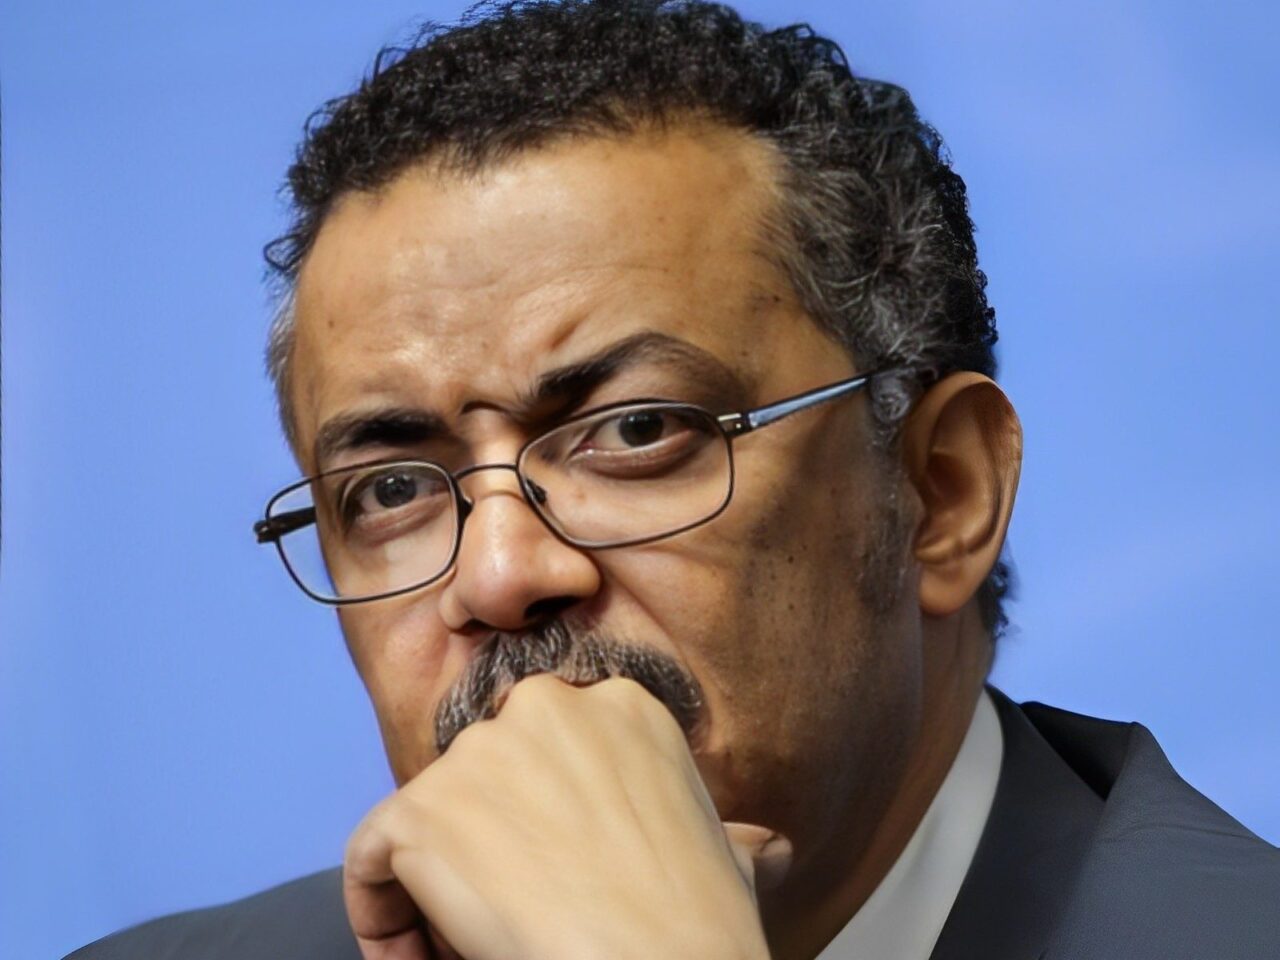 Tedros Adhanom Ghebreyesus: We need to shift from competition for healthcare workers to collaboration